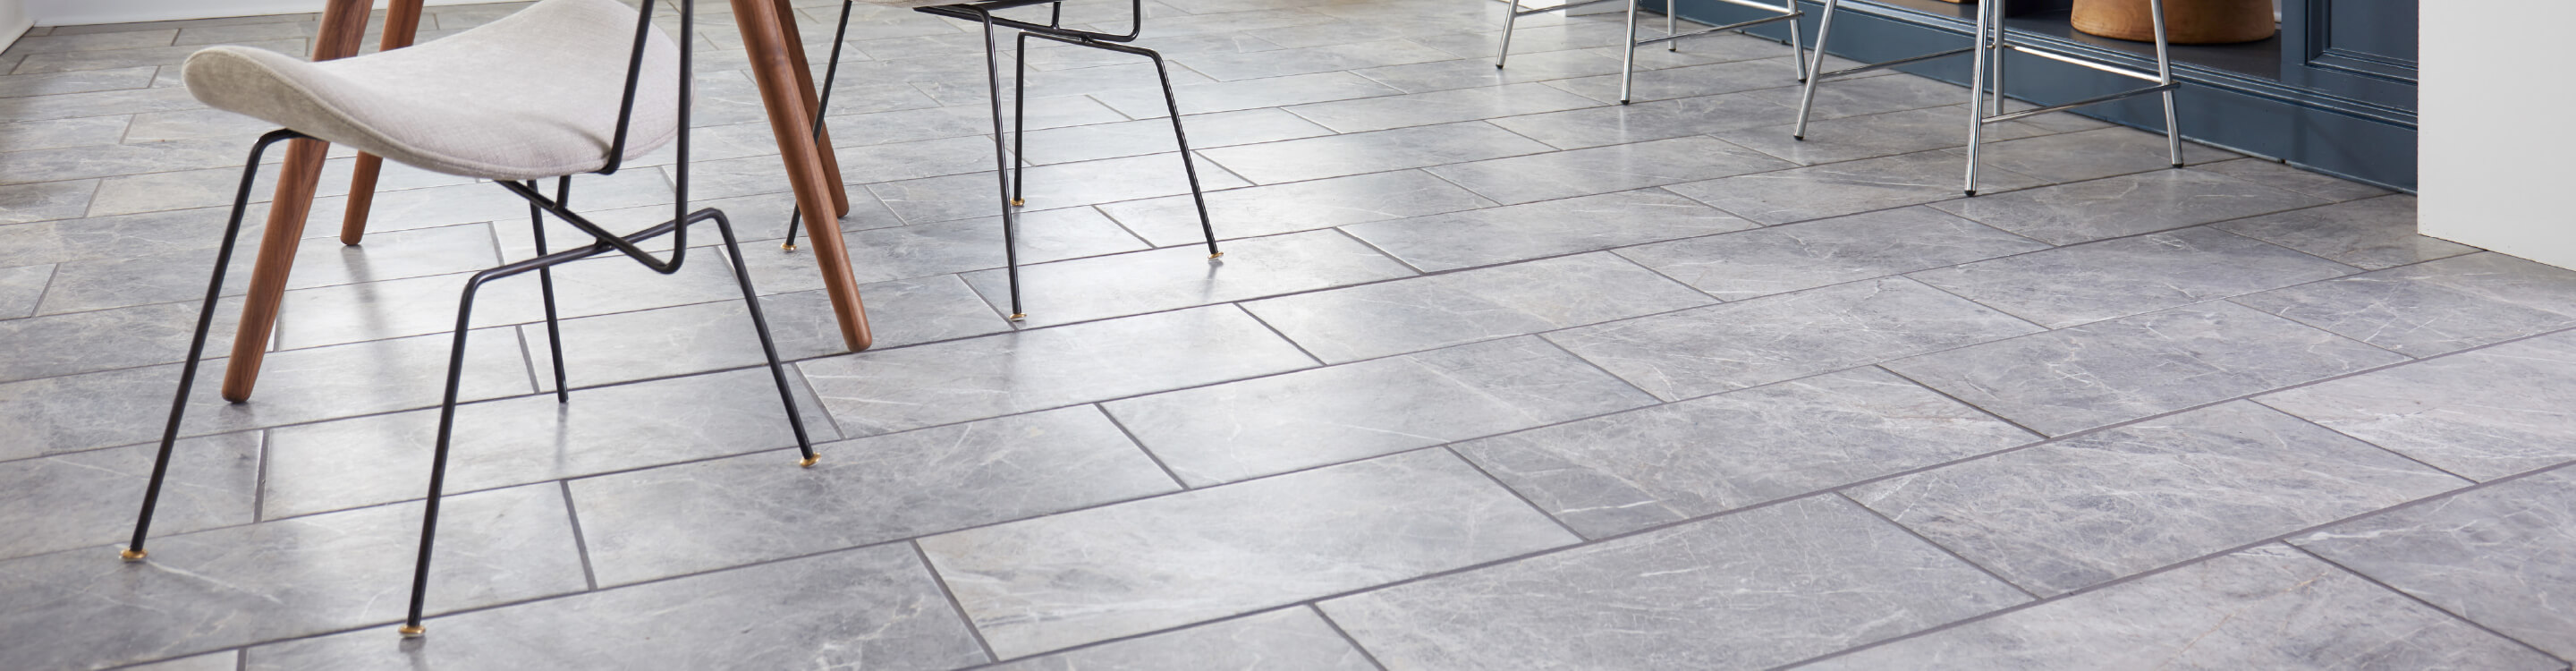 gray flooring tiles in kitchen with charis